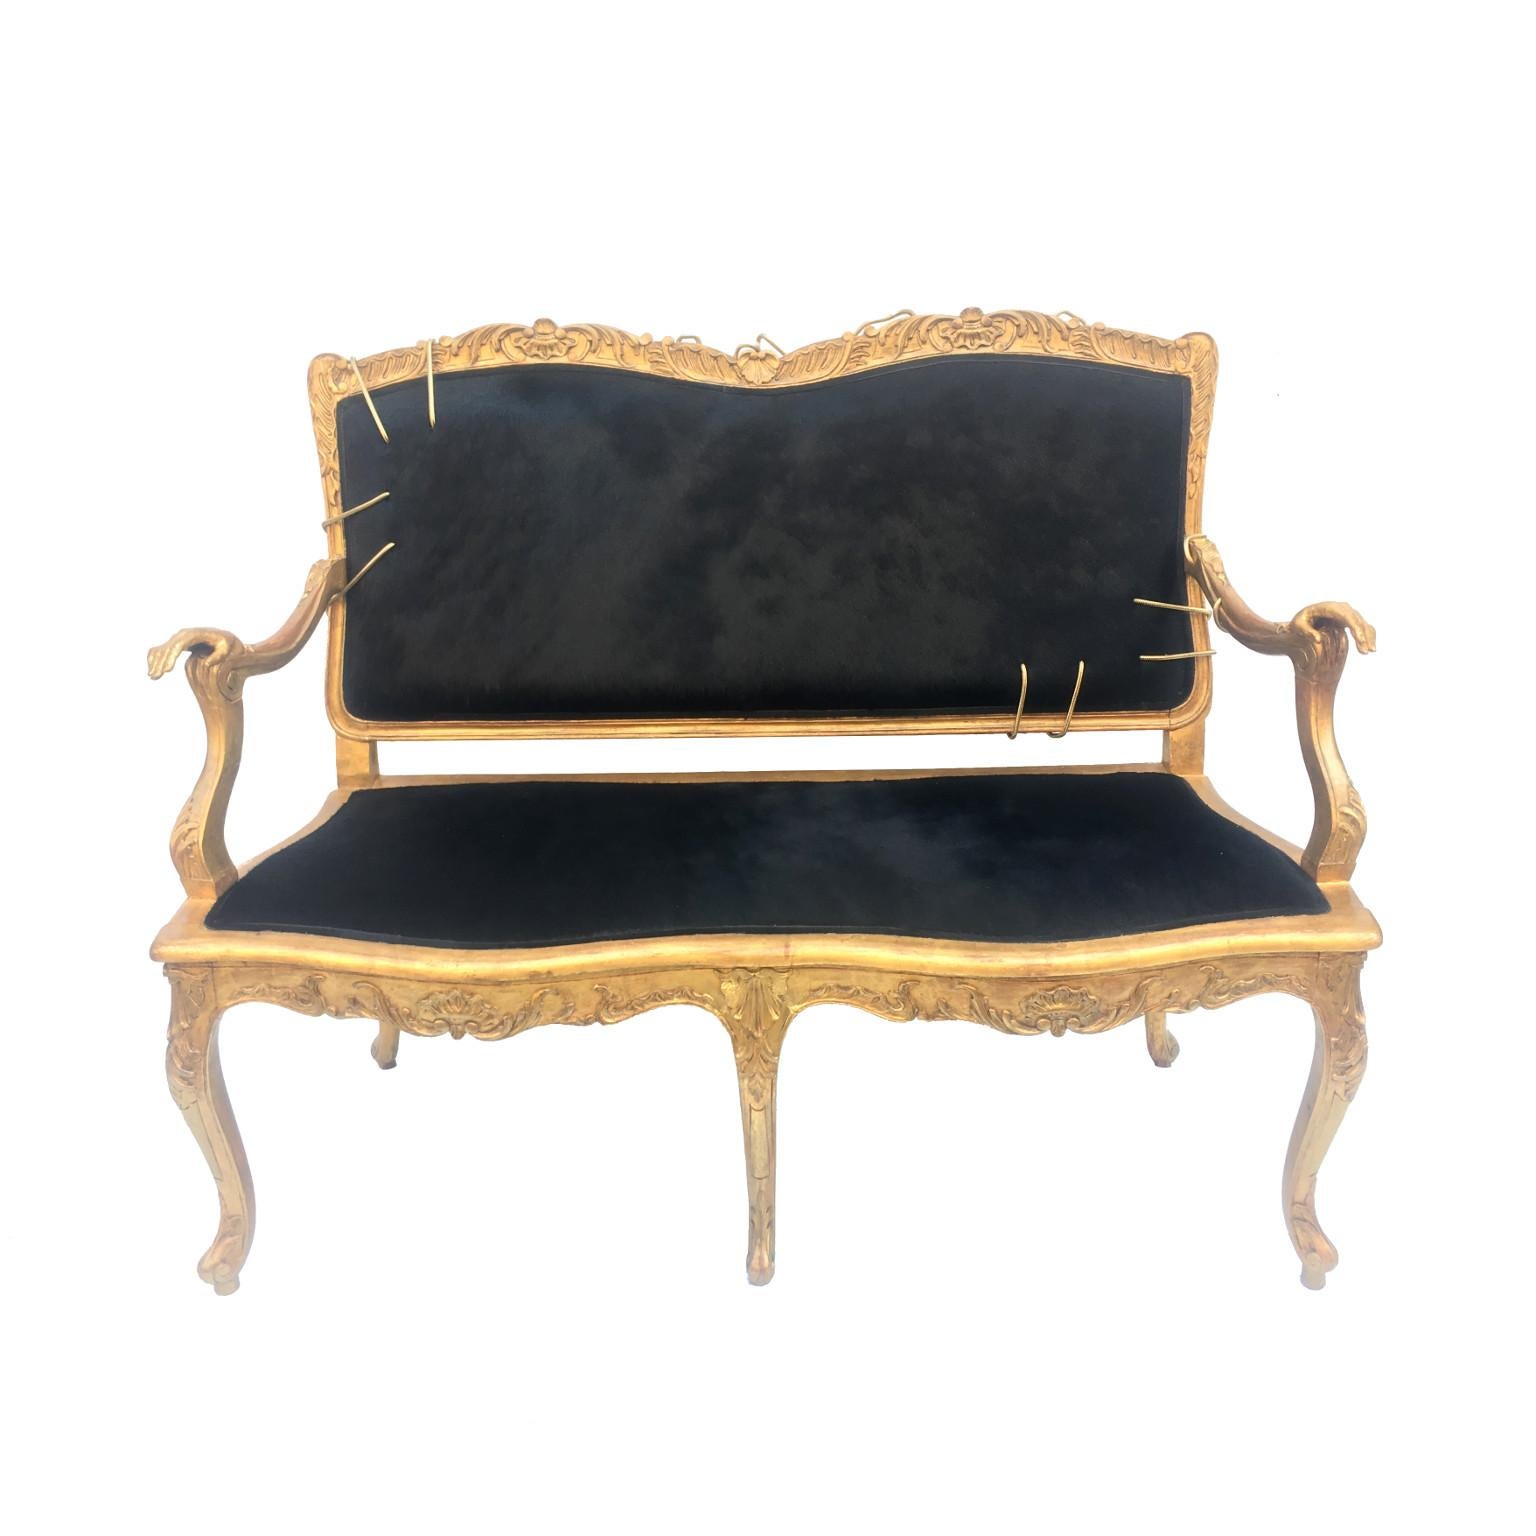 One of a Kind Giltwood and Black Pony Hair Covered Sofa with Hands Sculptures For Sale 8